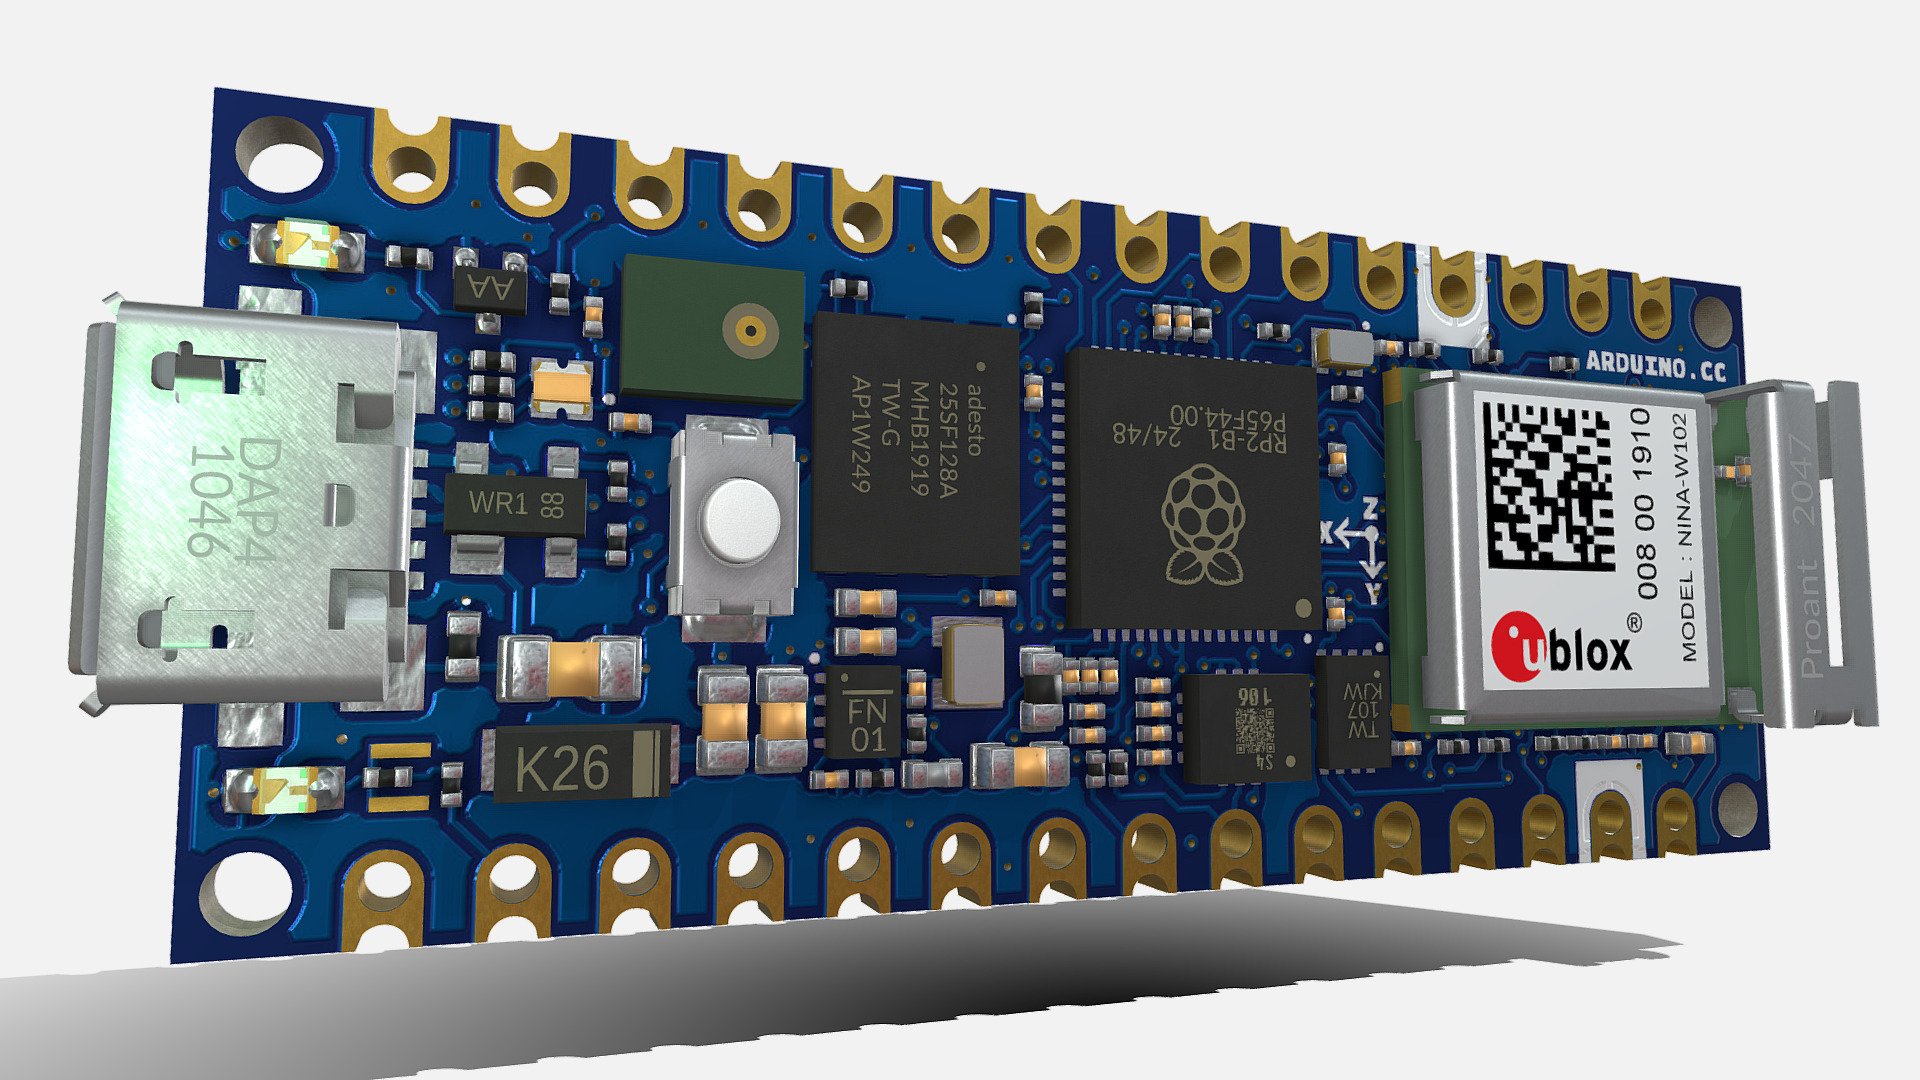 3D Model of the ARDUINO Nano RP2040. 
Description is visible here : https://docs.arduino.cc/hardware/nano-rp2040-connect

Model designed from the ALTIUM files availble in the web site and with blender tools v2.93.6.

All components can be modified (translate, delete,…). 
Don’t hesitate to comment somes hardware references that you want to see in sketchfab - Arduino Nano RP2040 - Buy Royalty Free 3D model by F2A (@Fa_Sketch) 3d model